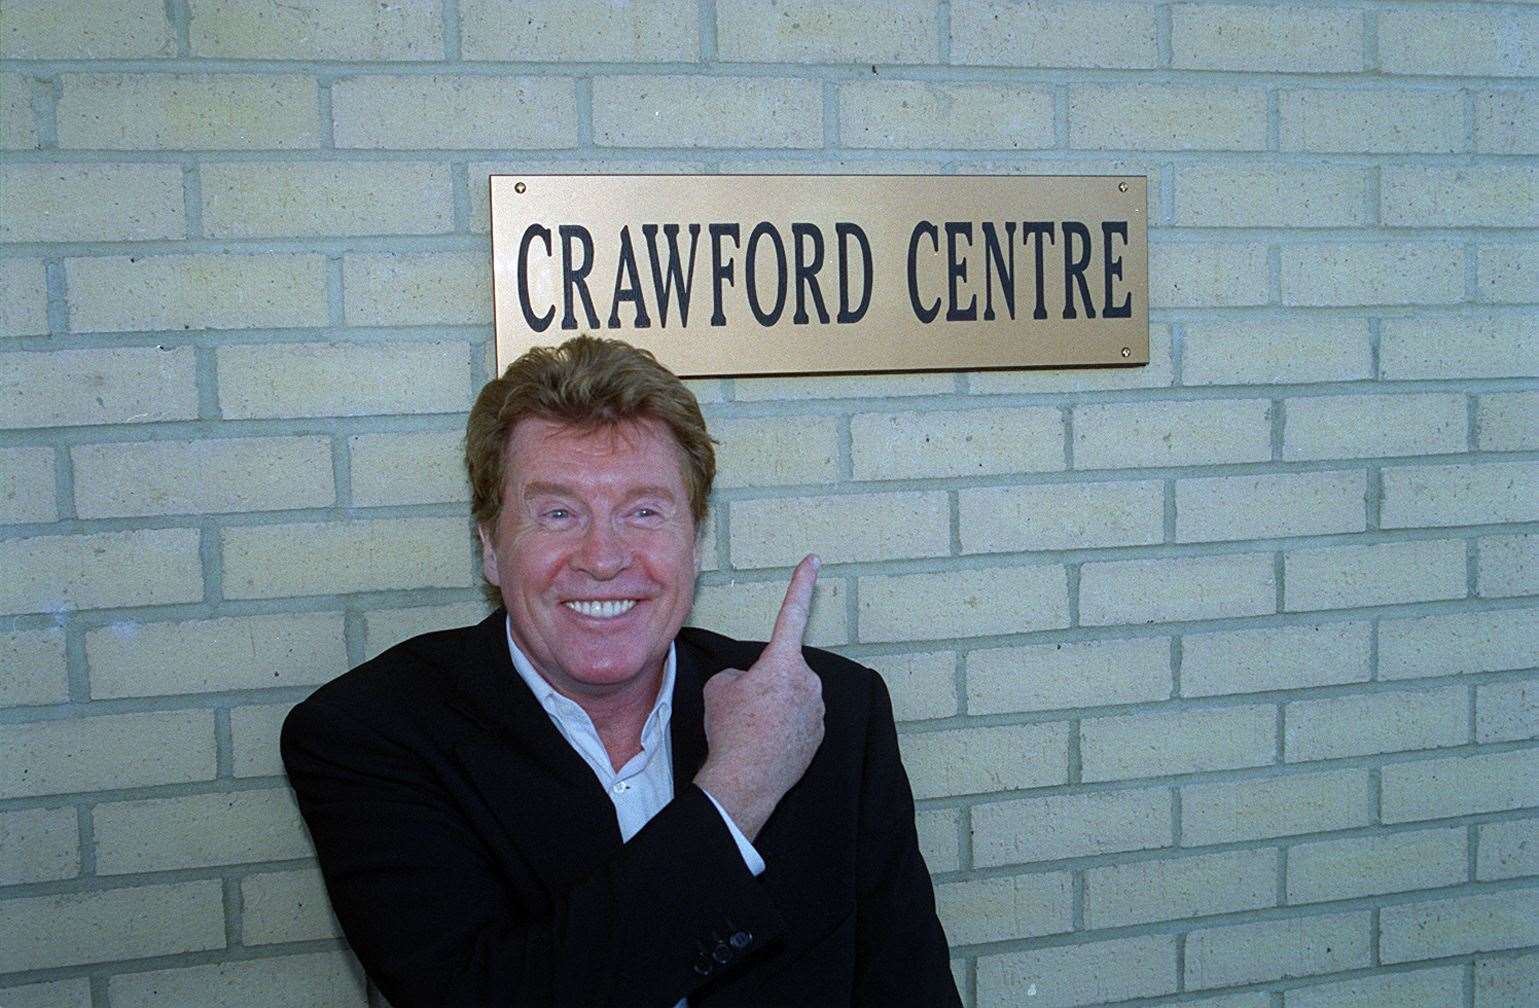 Ann Everett invited West End star Michael Crawford to return to the Island to open the Crawford Centre in November, 2001